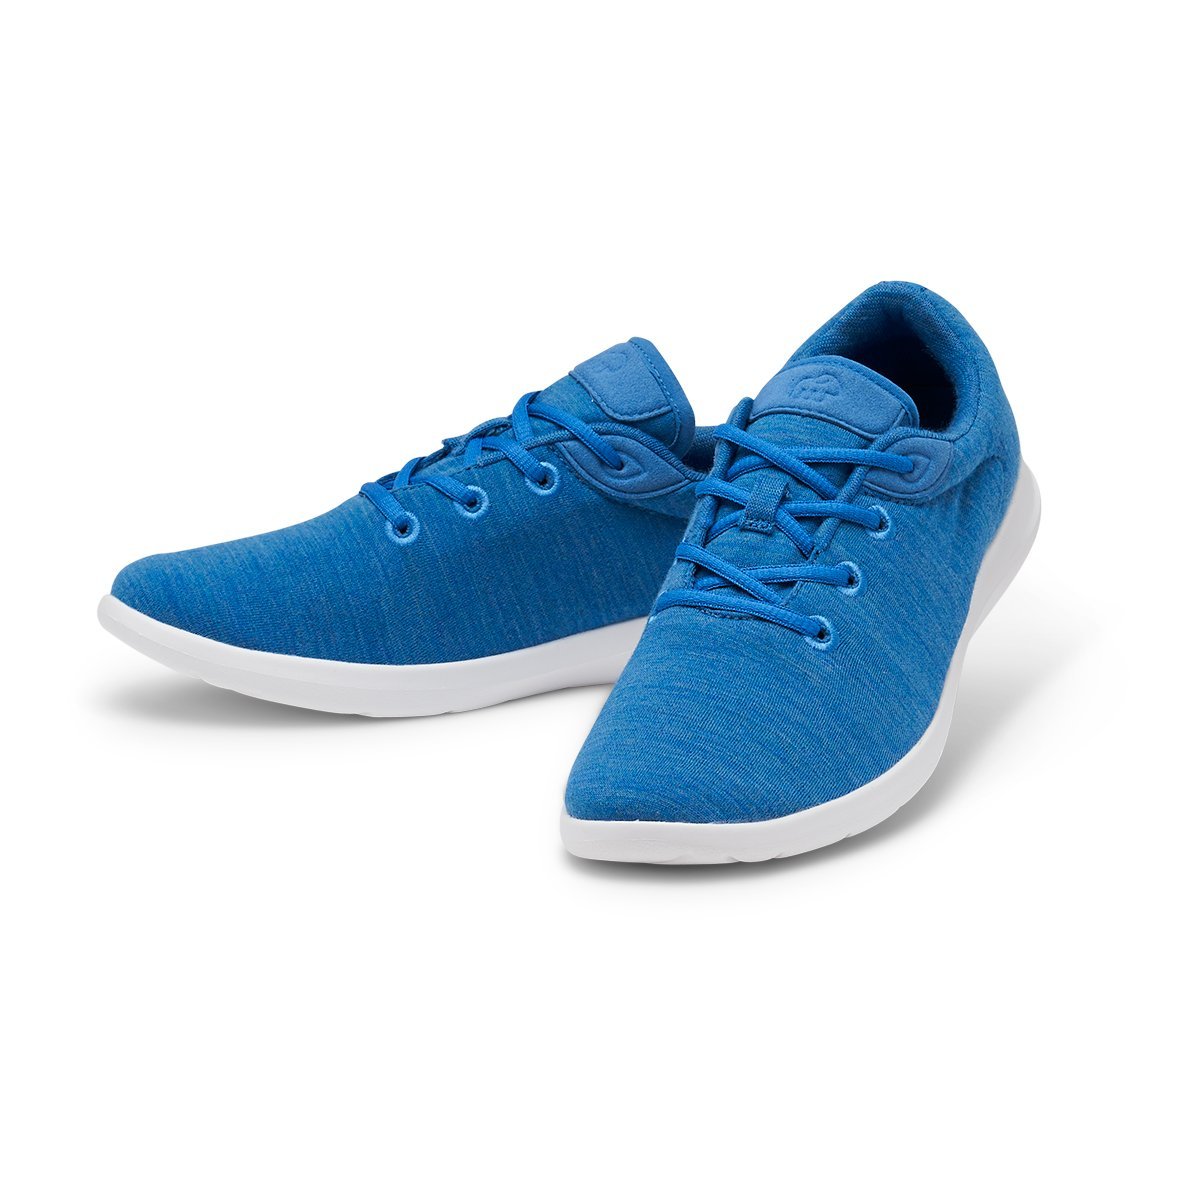 Men's Lace-Ups Bright Blue - Special Offer